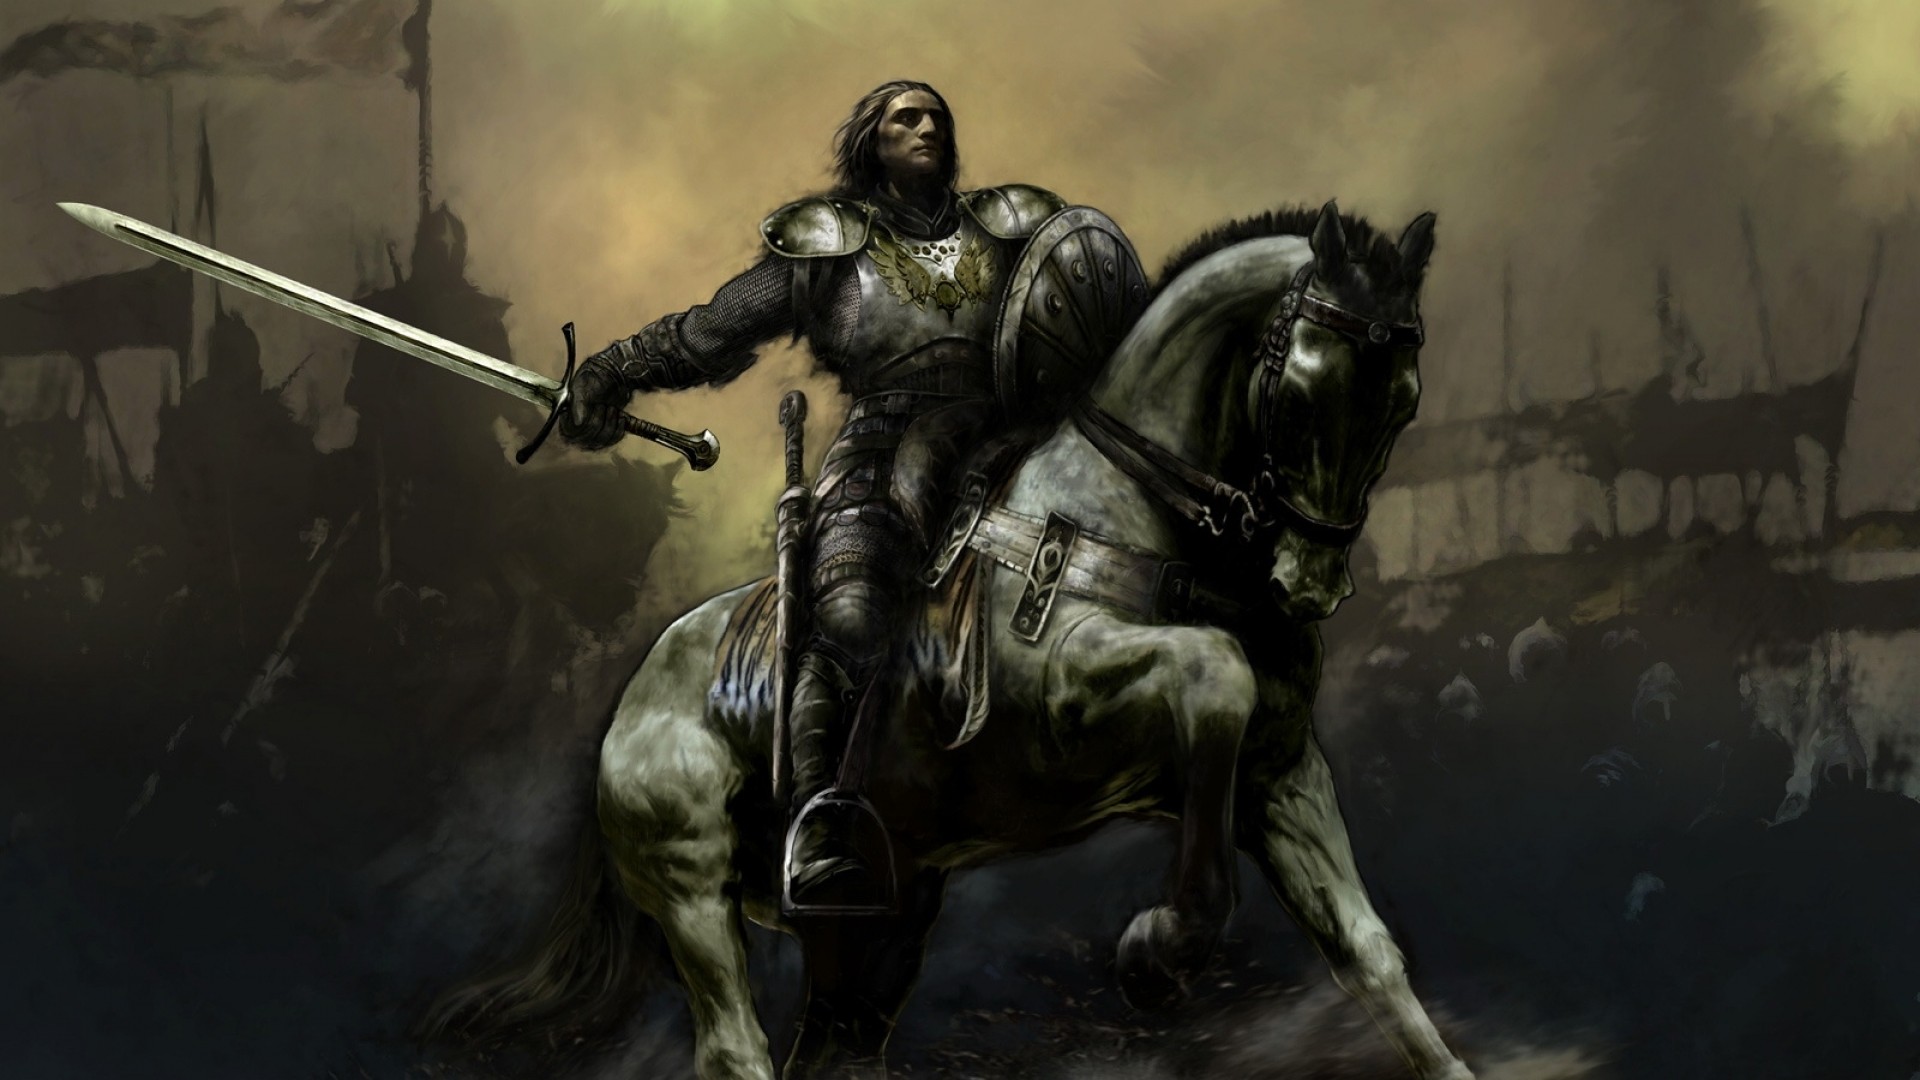 Medieval Knight Wallpaper Images amp Pictures   Becuo